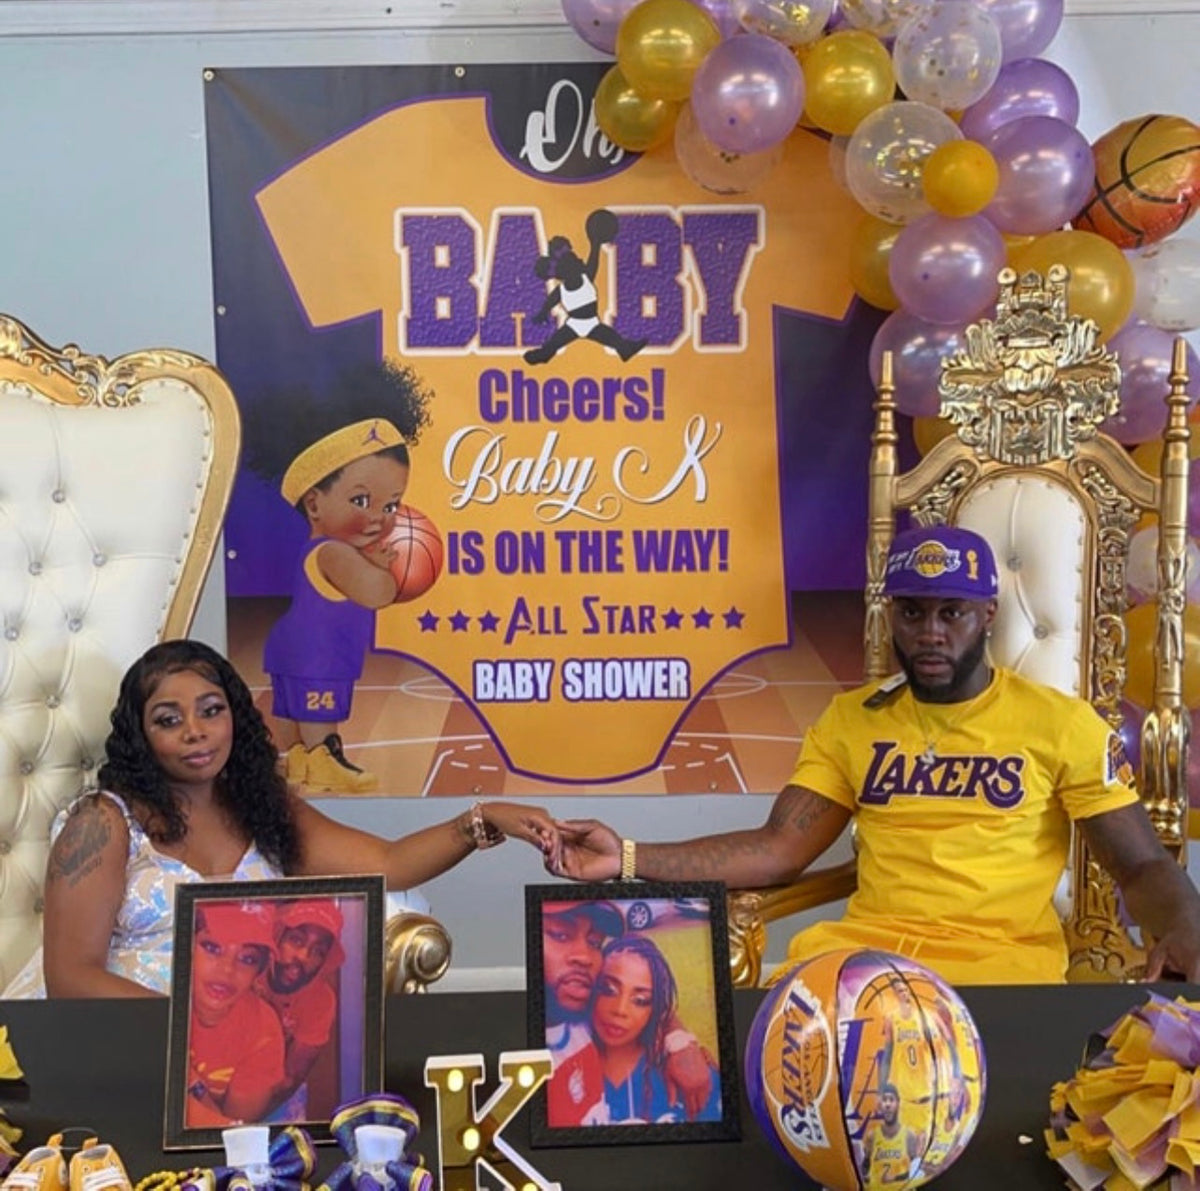 backdrop lakers themed birthday party